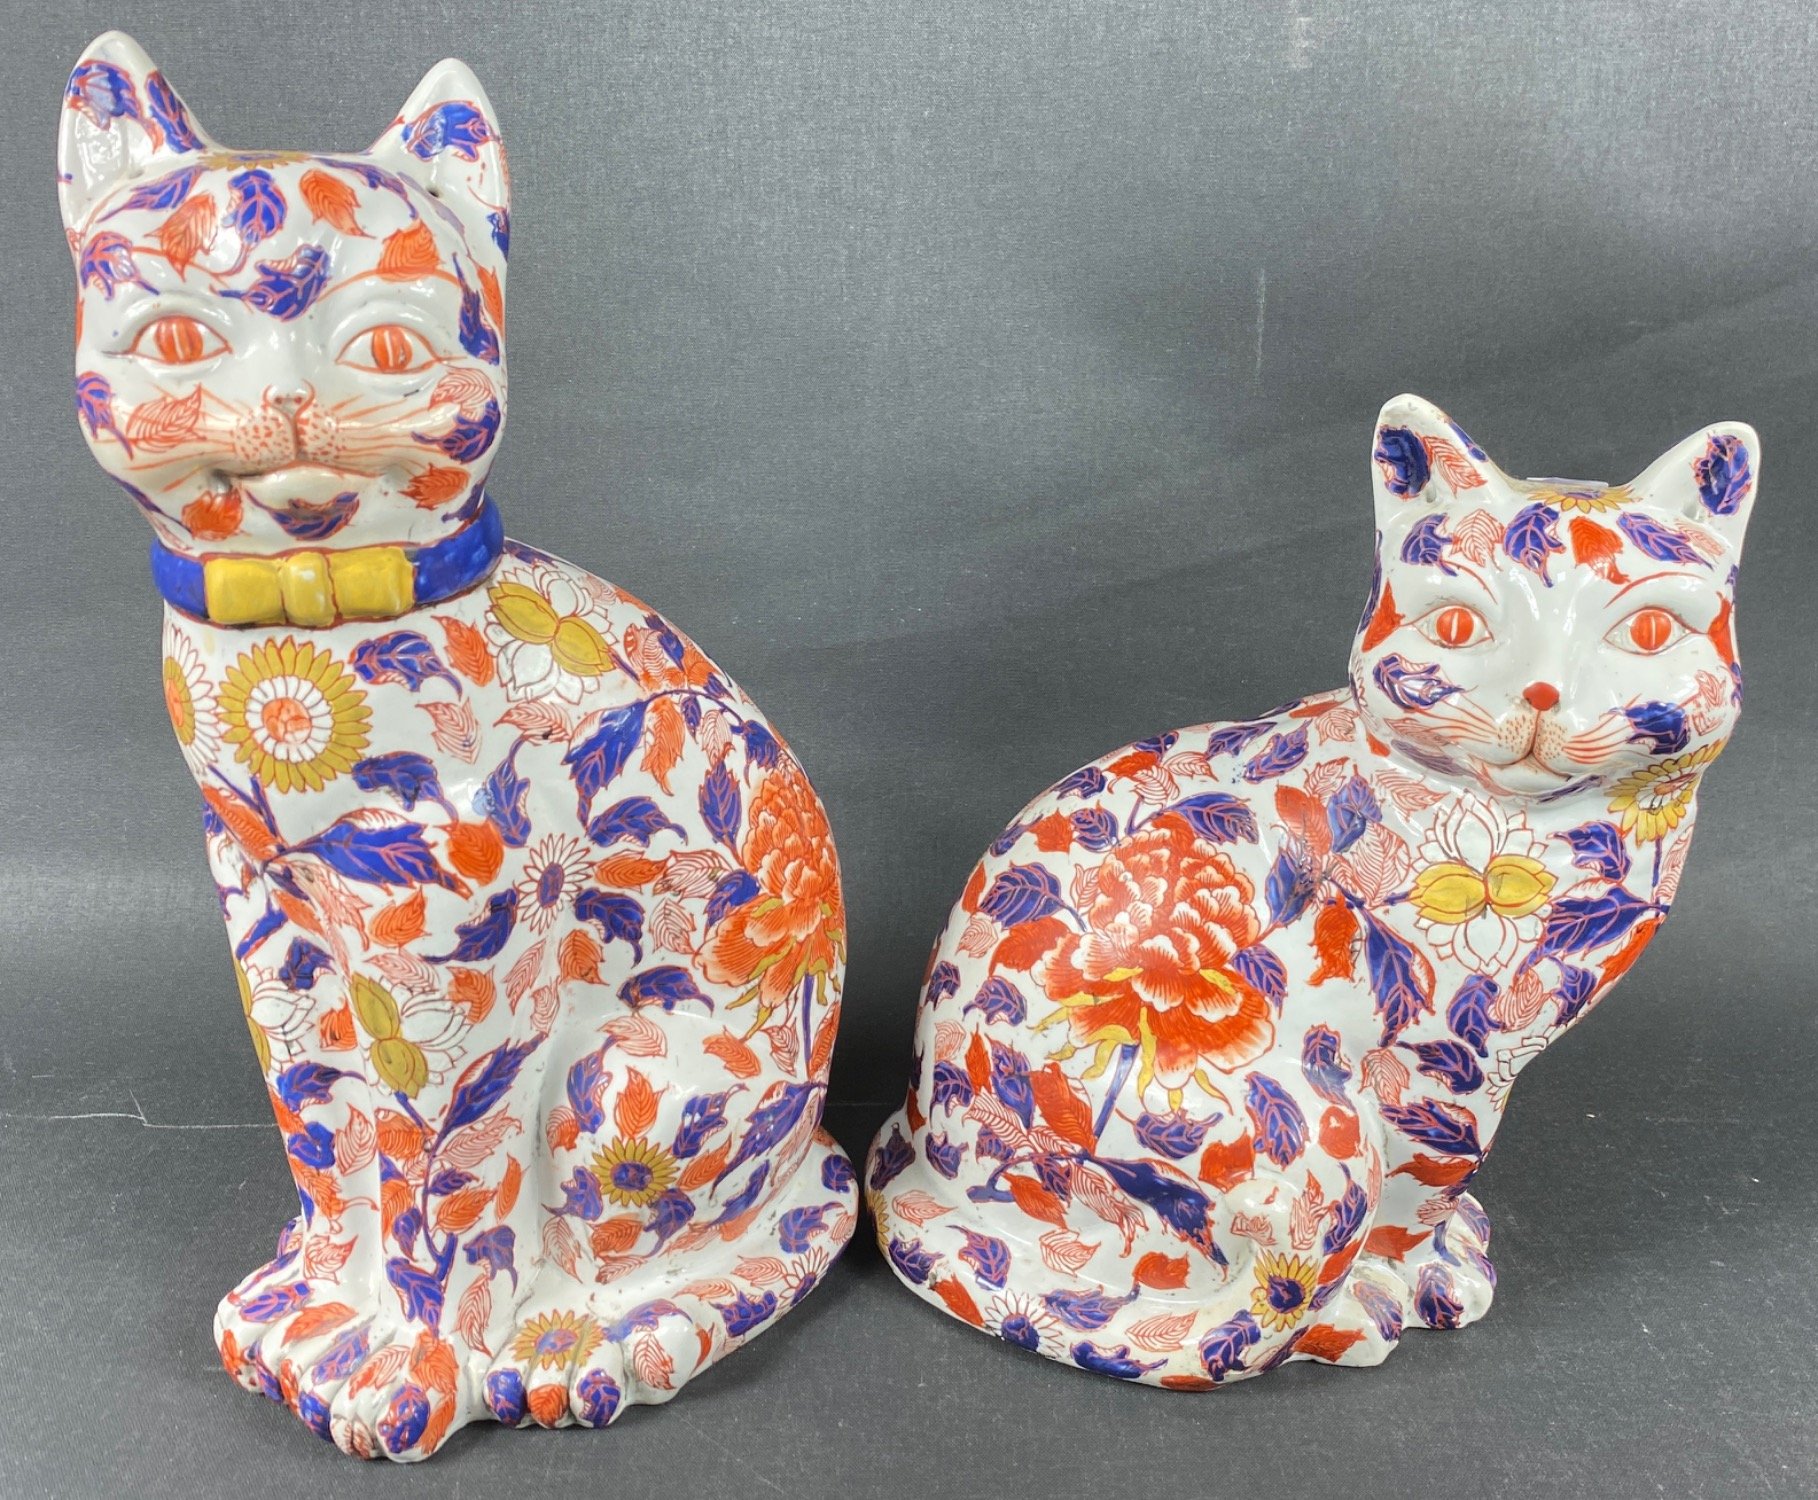 TWO stunning ceramic Oriental handpainted ceramic glazed cats (possibly incense burners) in Imari